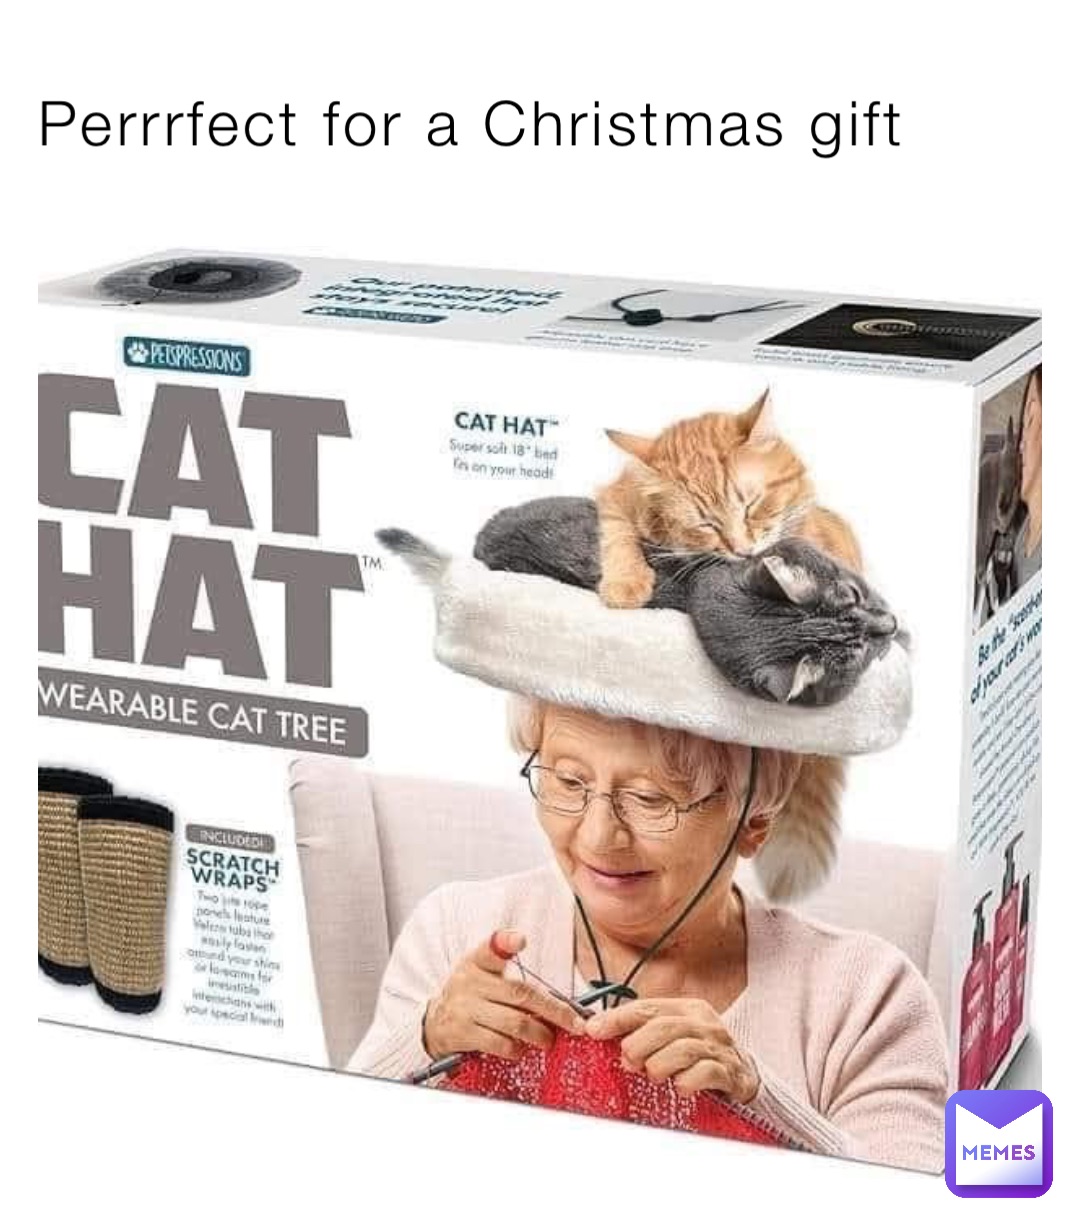 Perrrfect for a Christmas gift